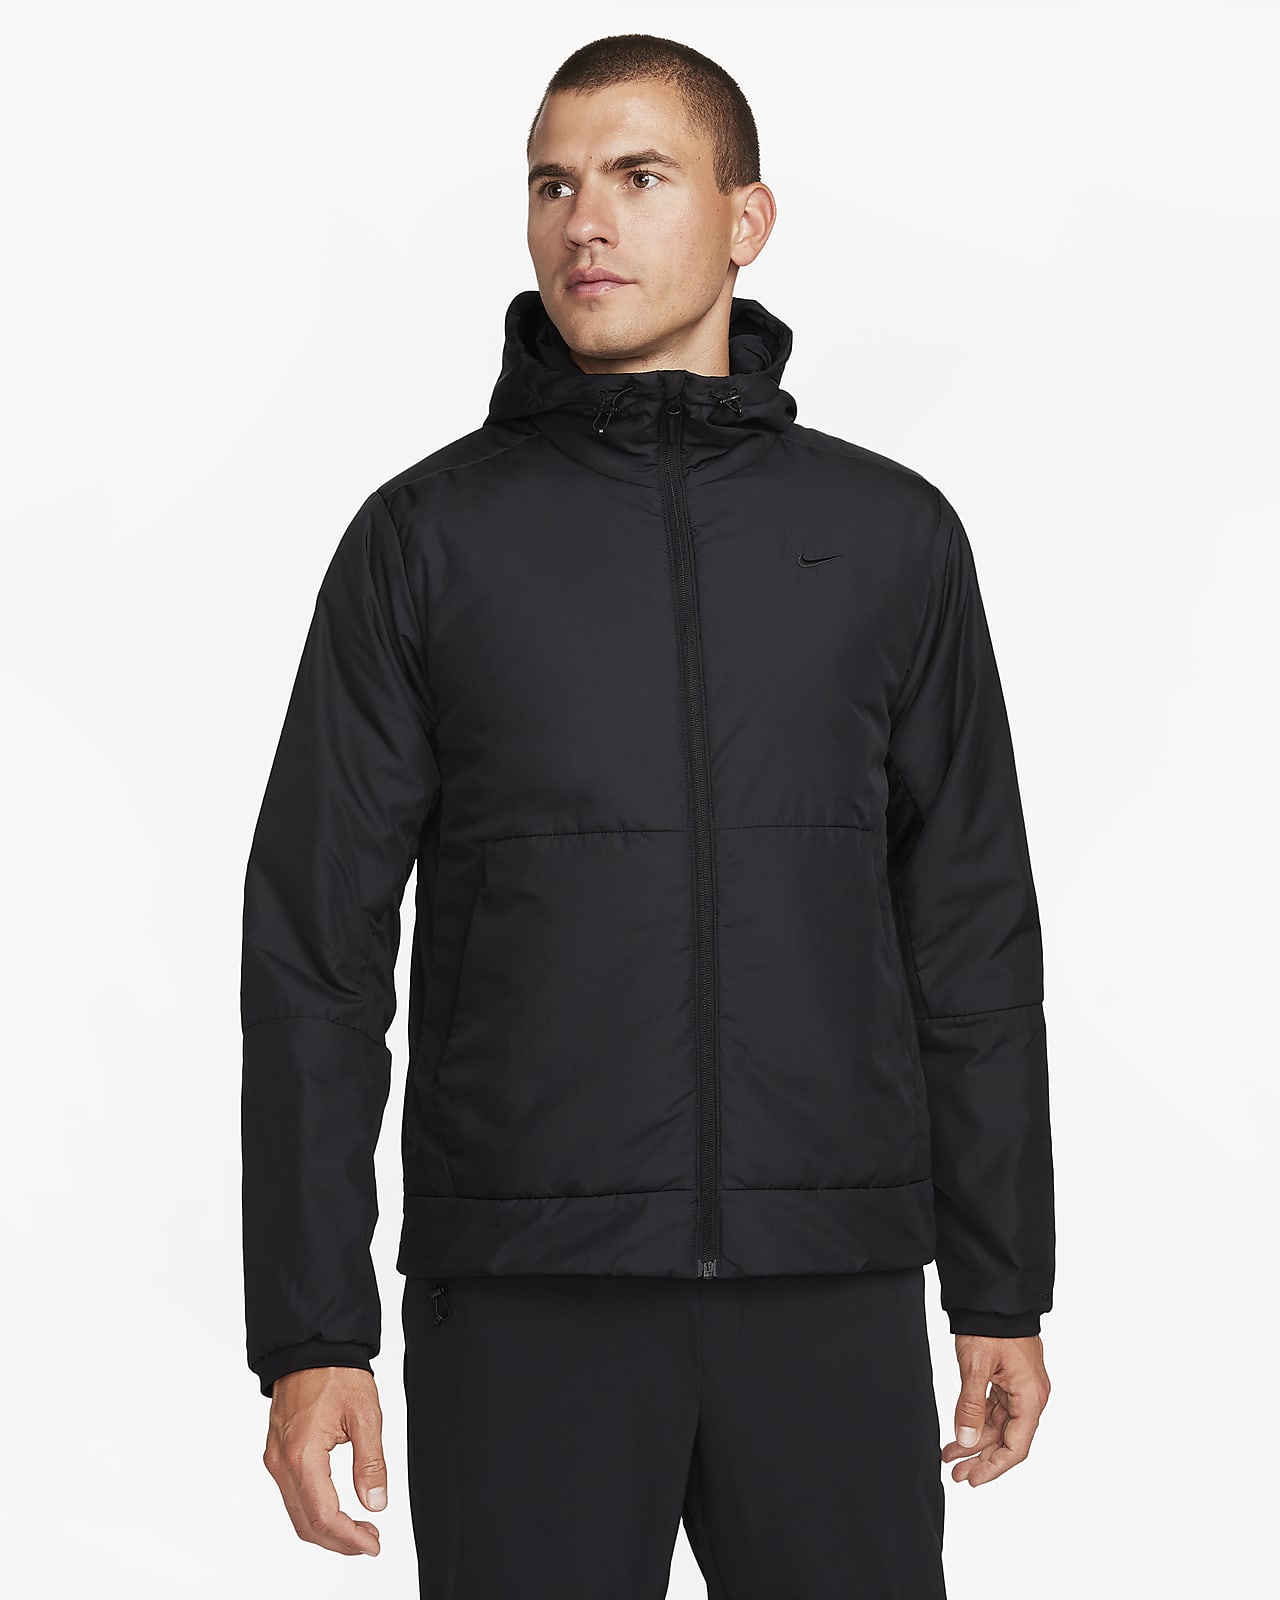 Veste Therma-FIT Nike Unlimited pour homme